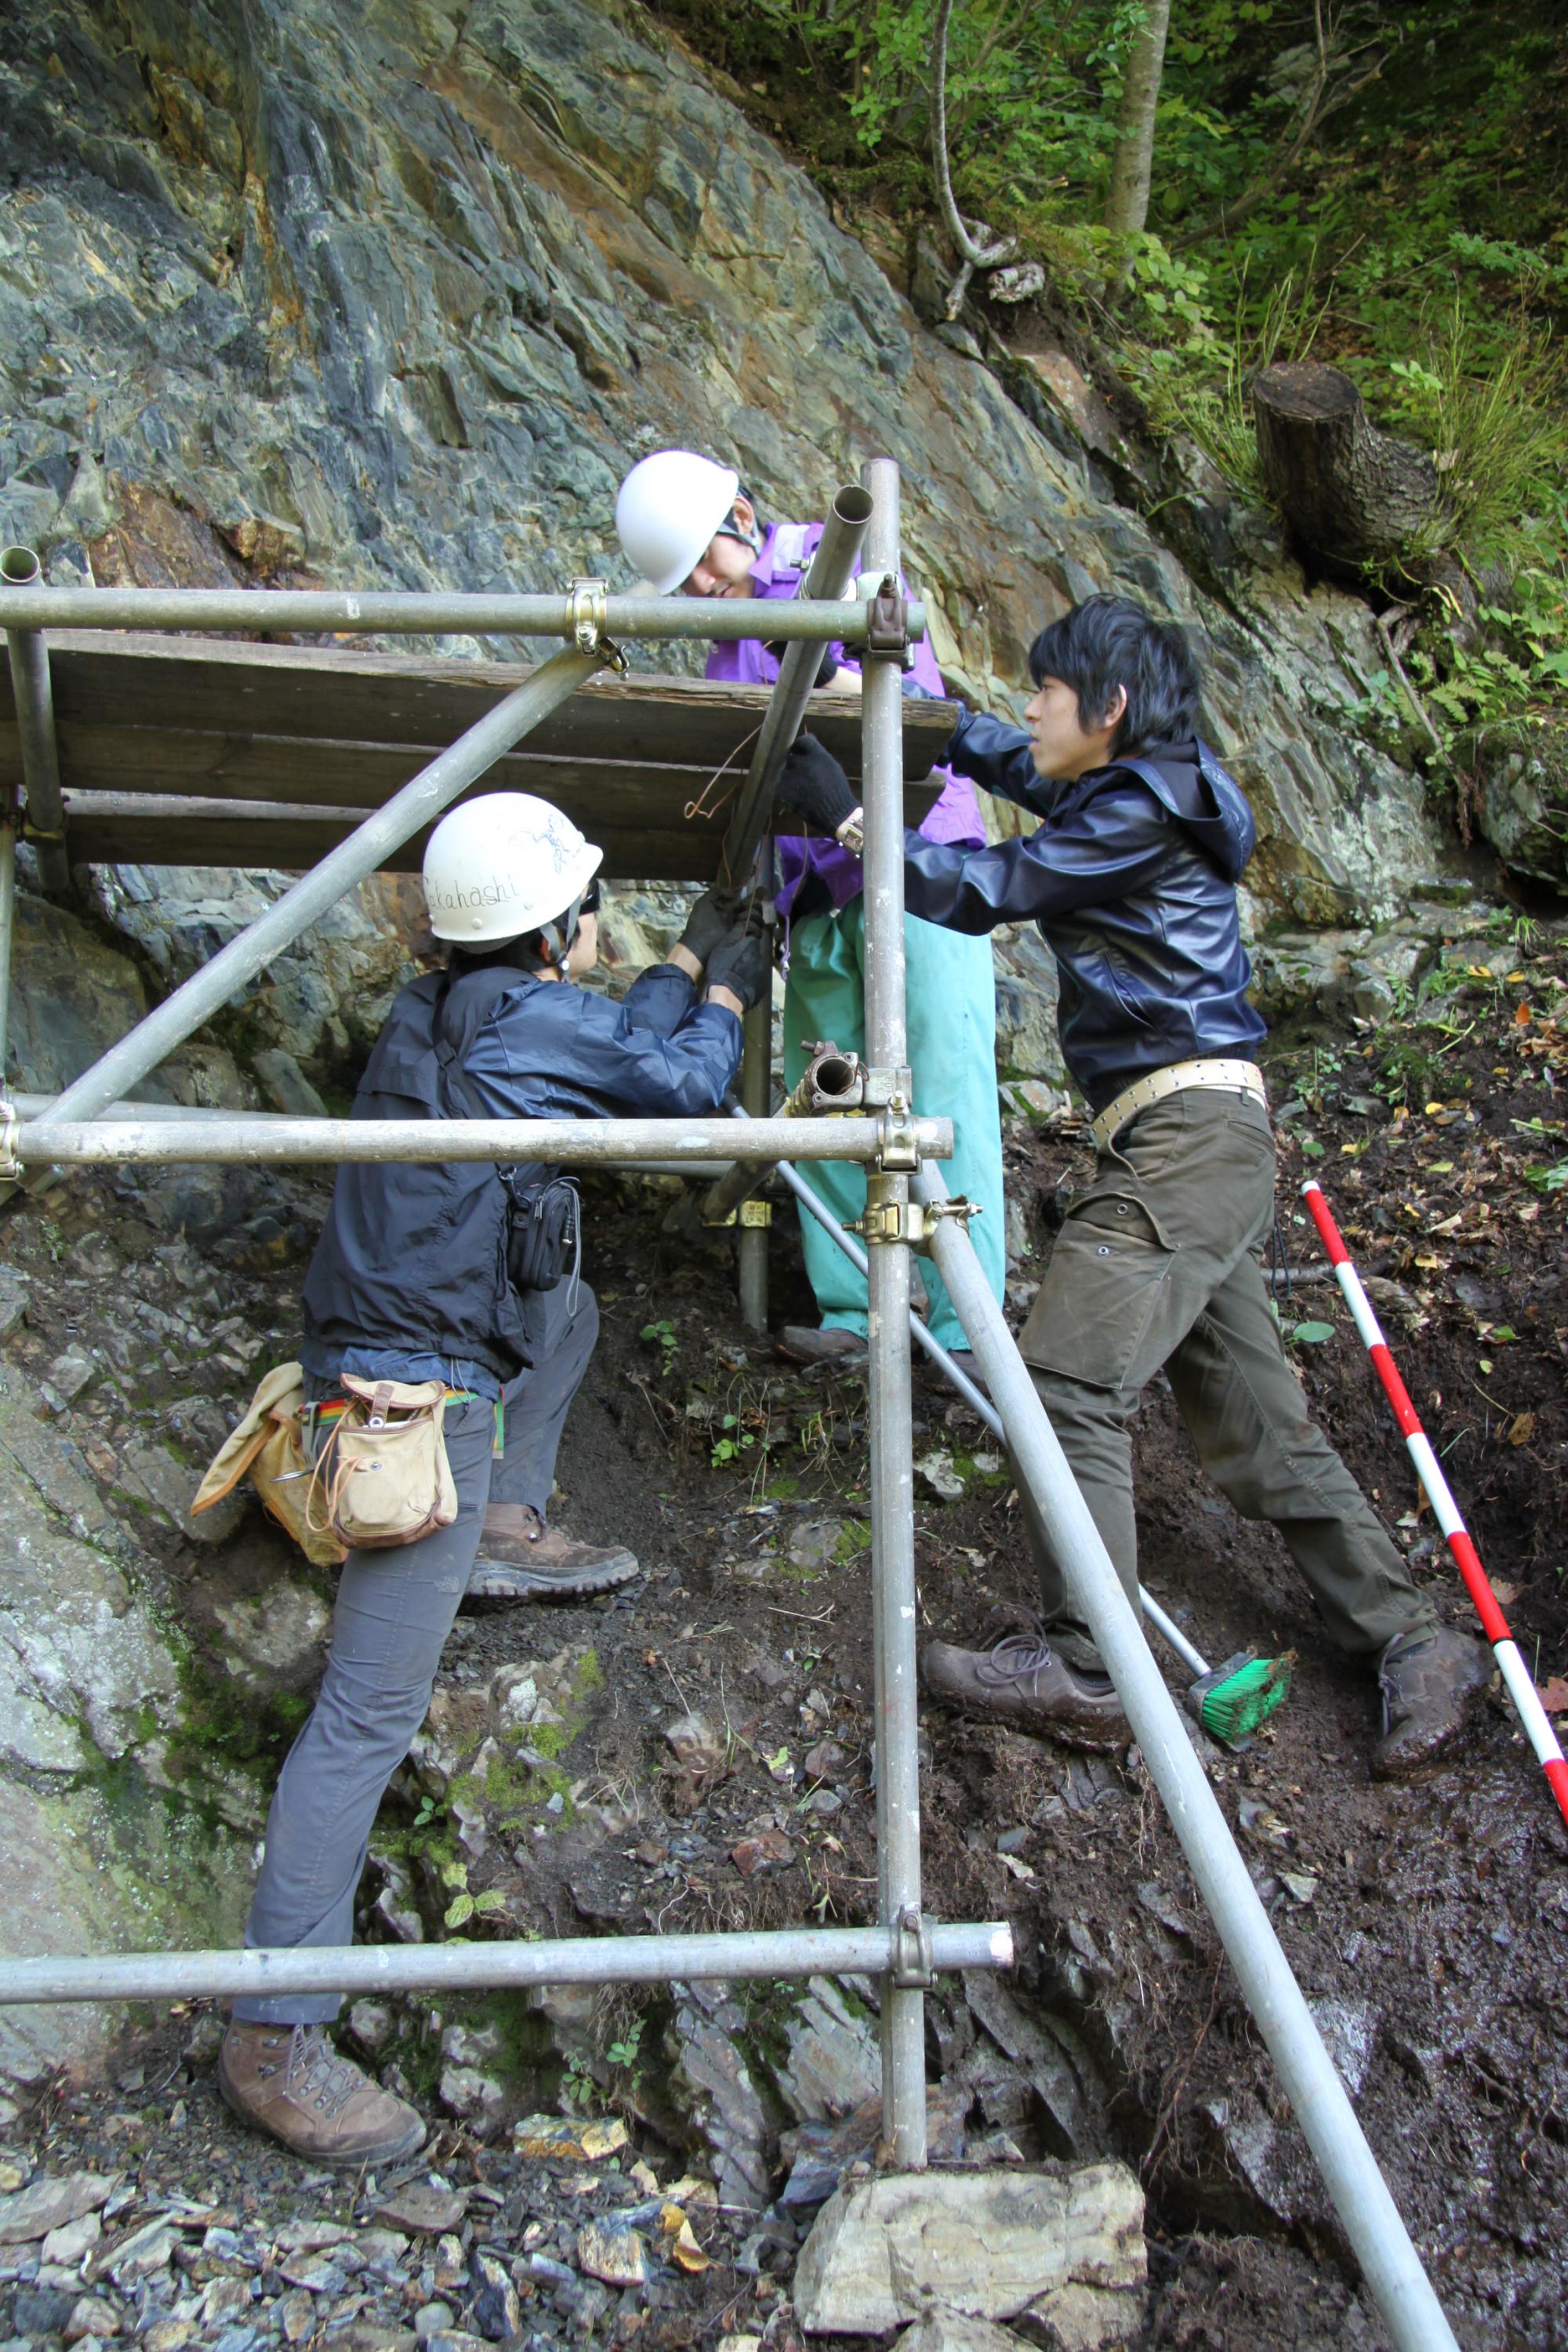 First author Kazumi Ozaki (r.) takes geological samples from layers of rock formed during the Great Permian Extinction. He is shown here with other researchers in Japan doing work unrelated to this study.  Credit: Satoshi Takahashi / University of Tokyo